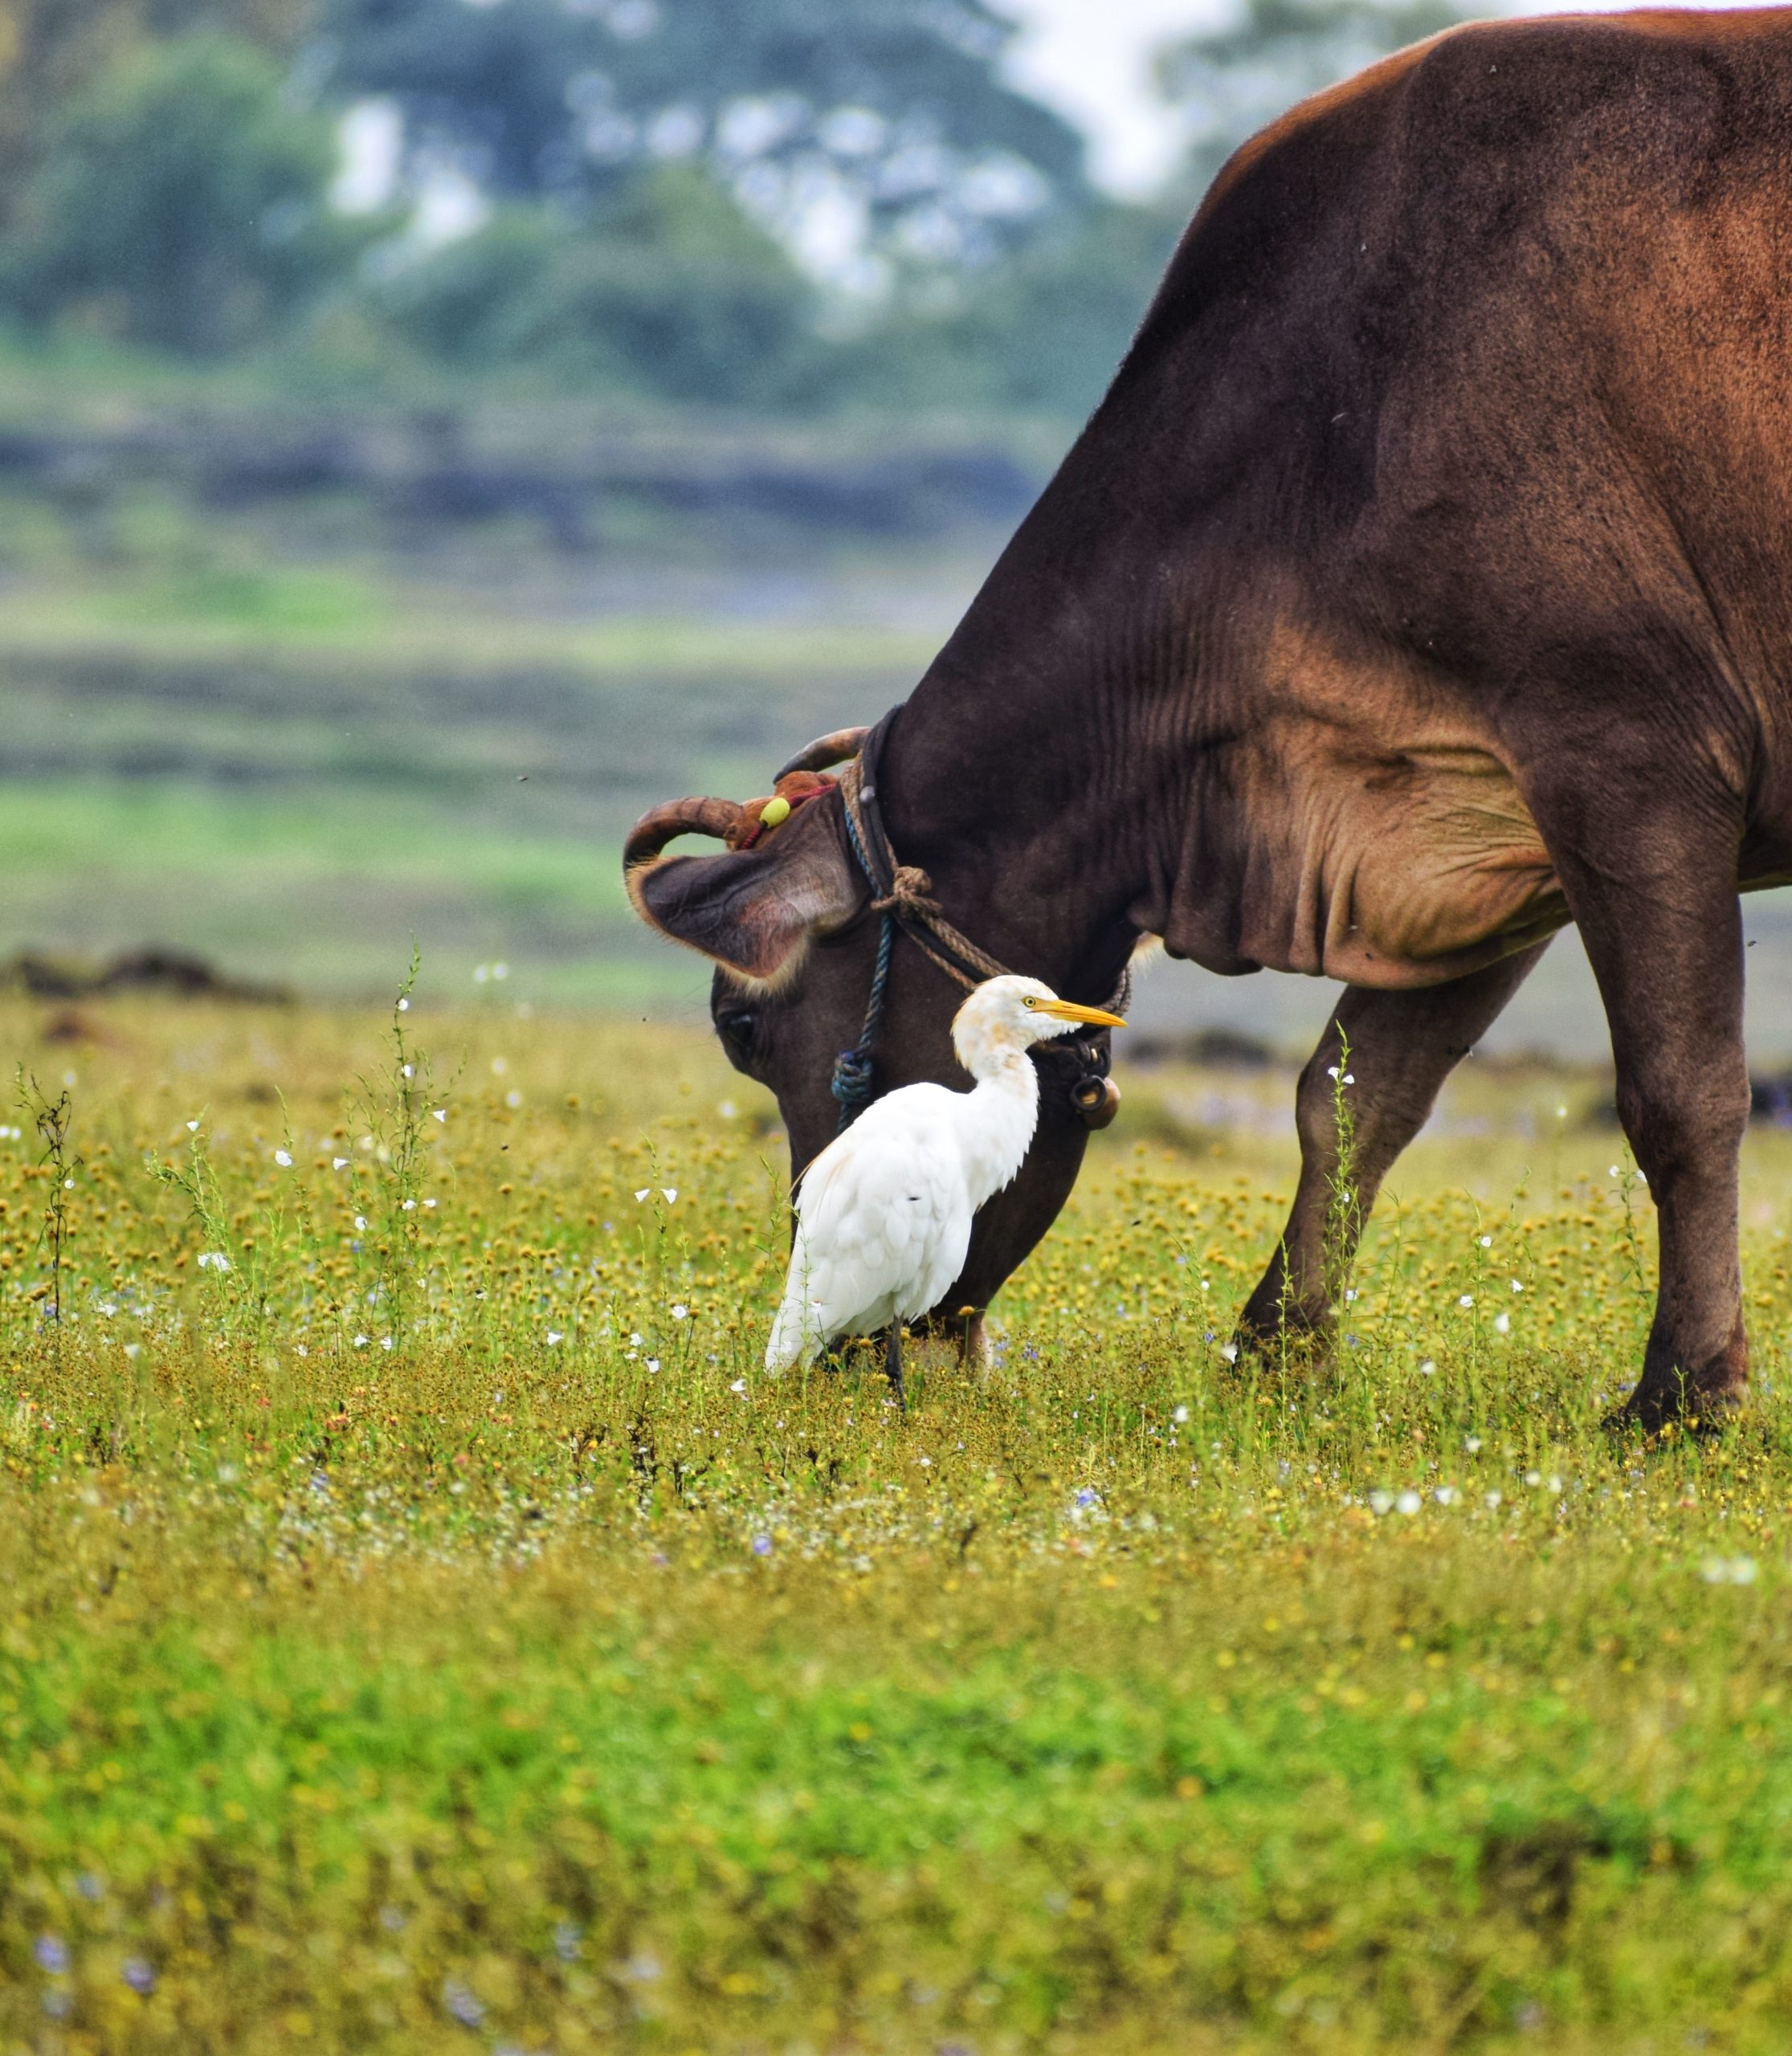 Cow and bird